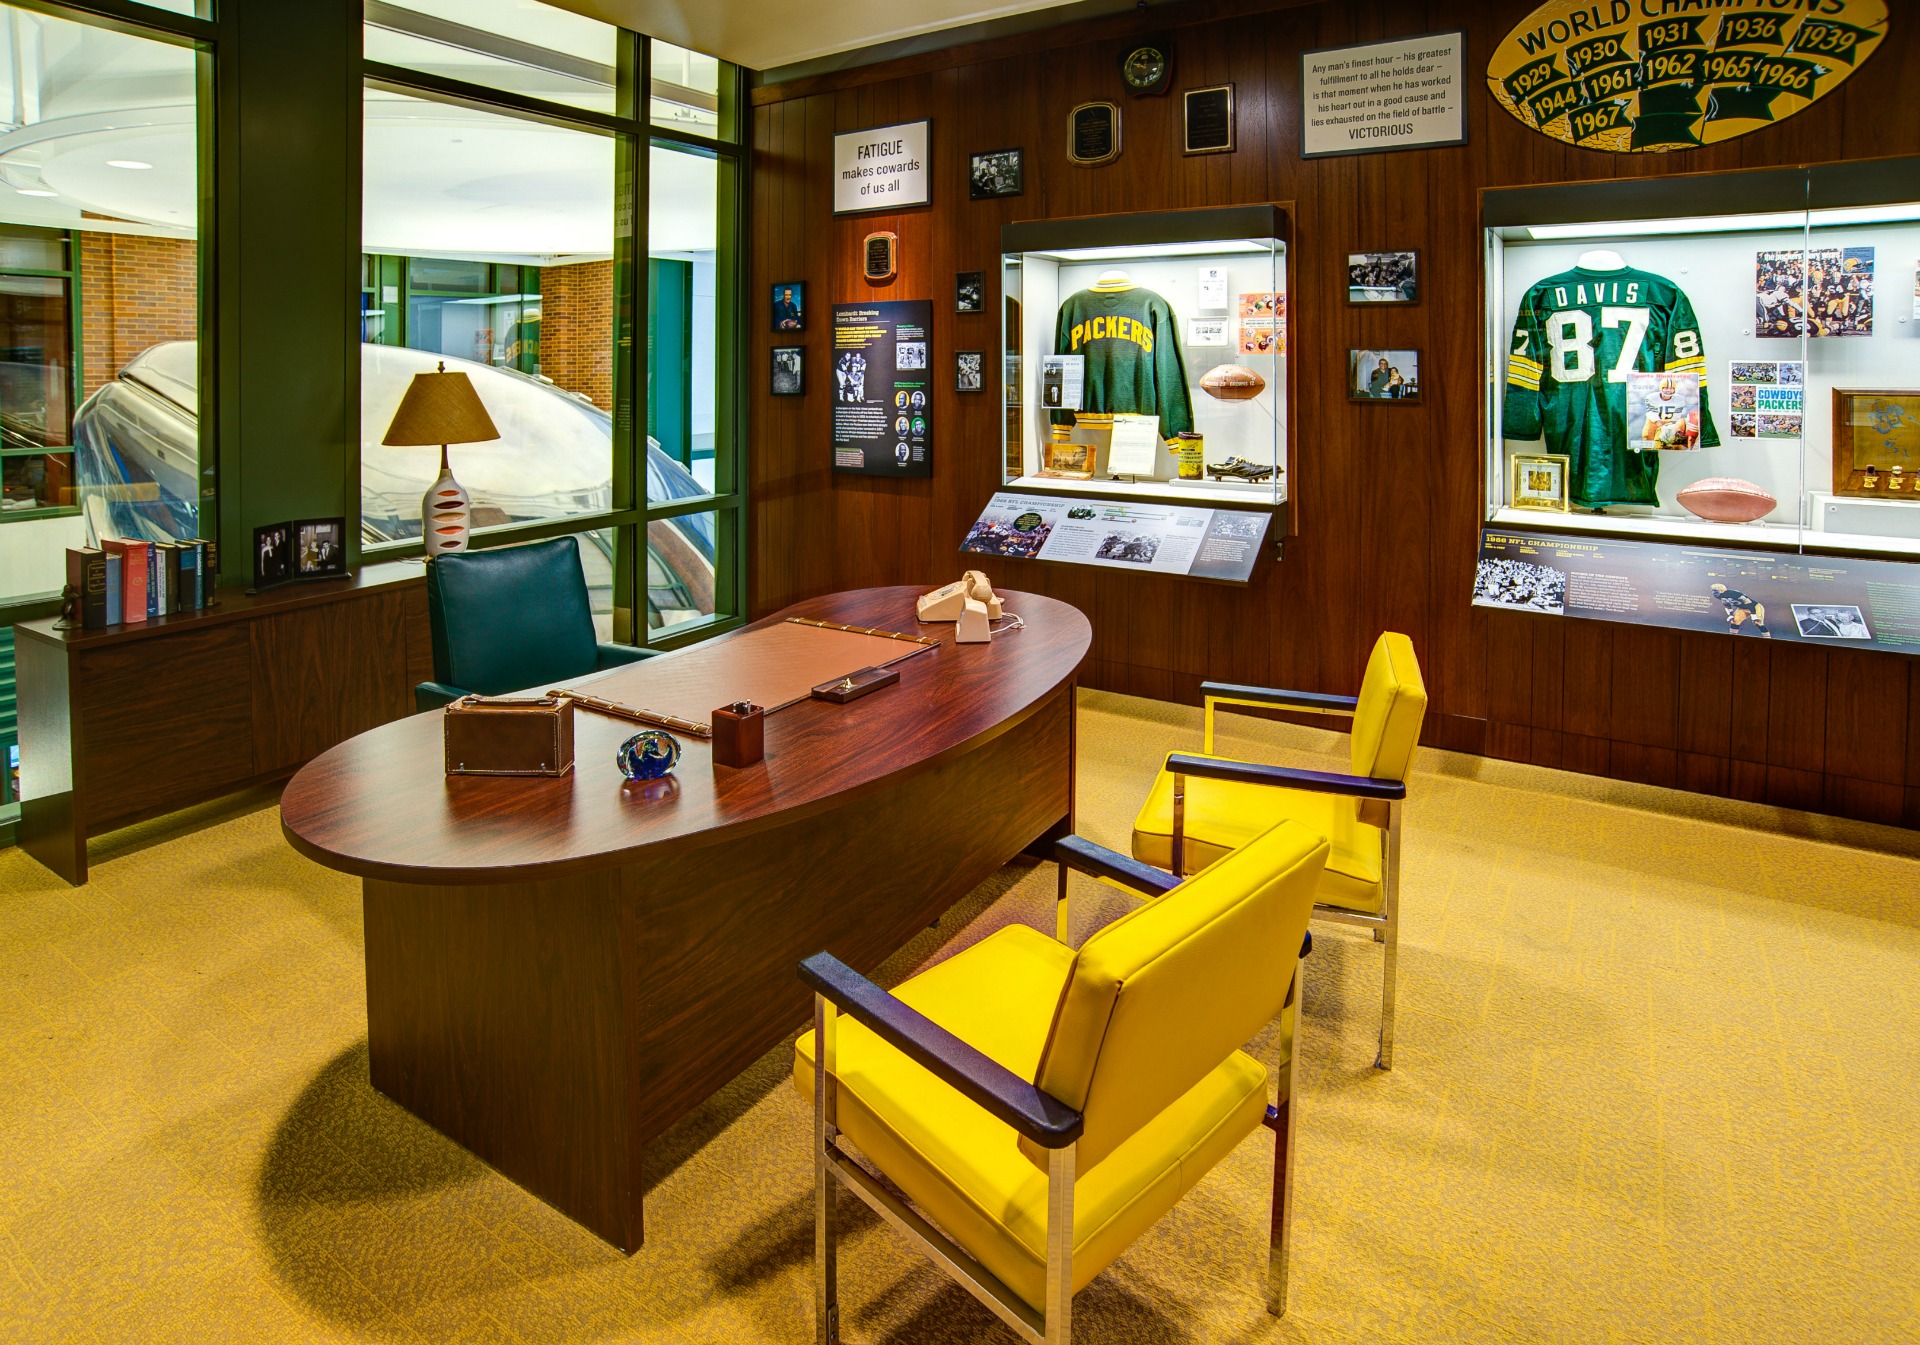 Green Bay Packers Hall of Fame